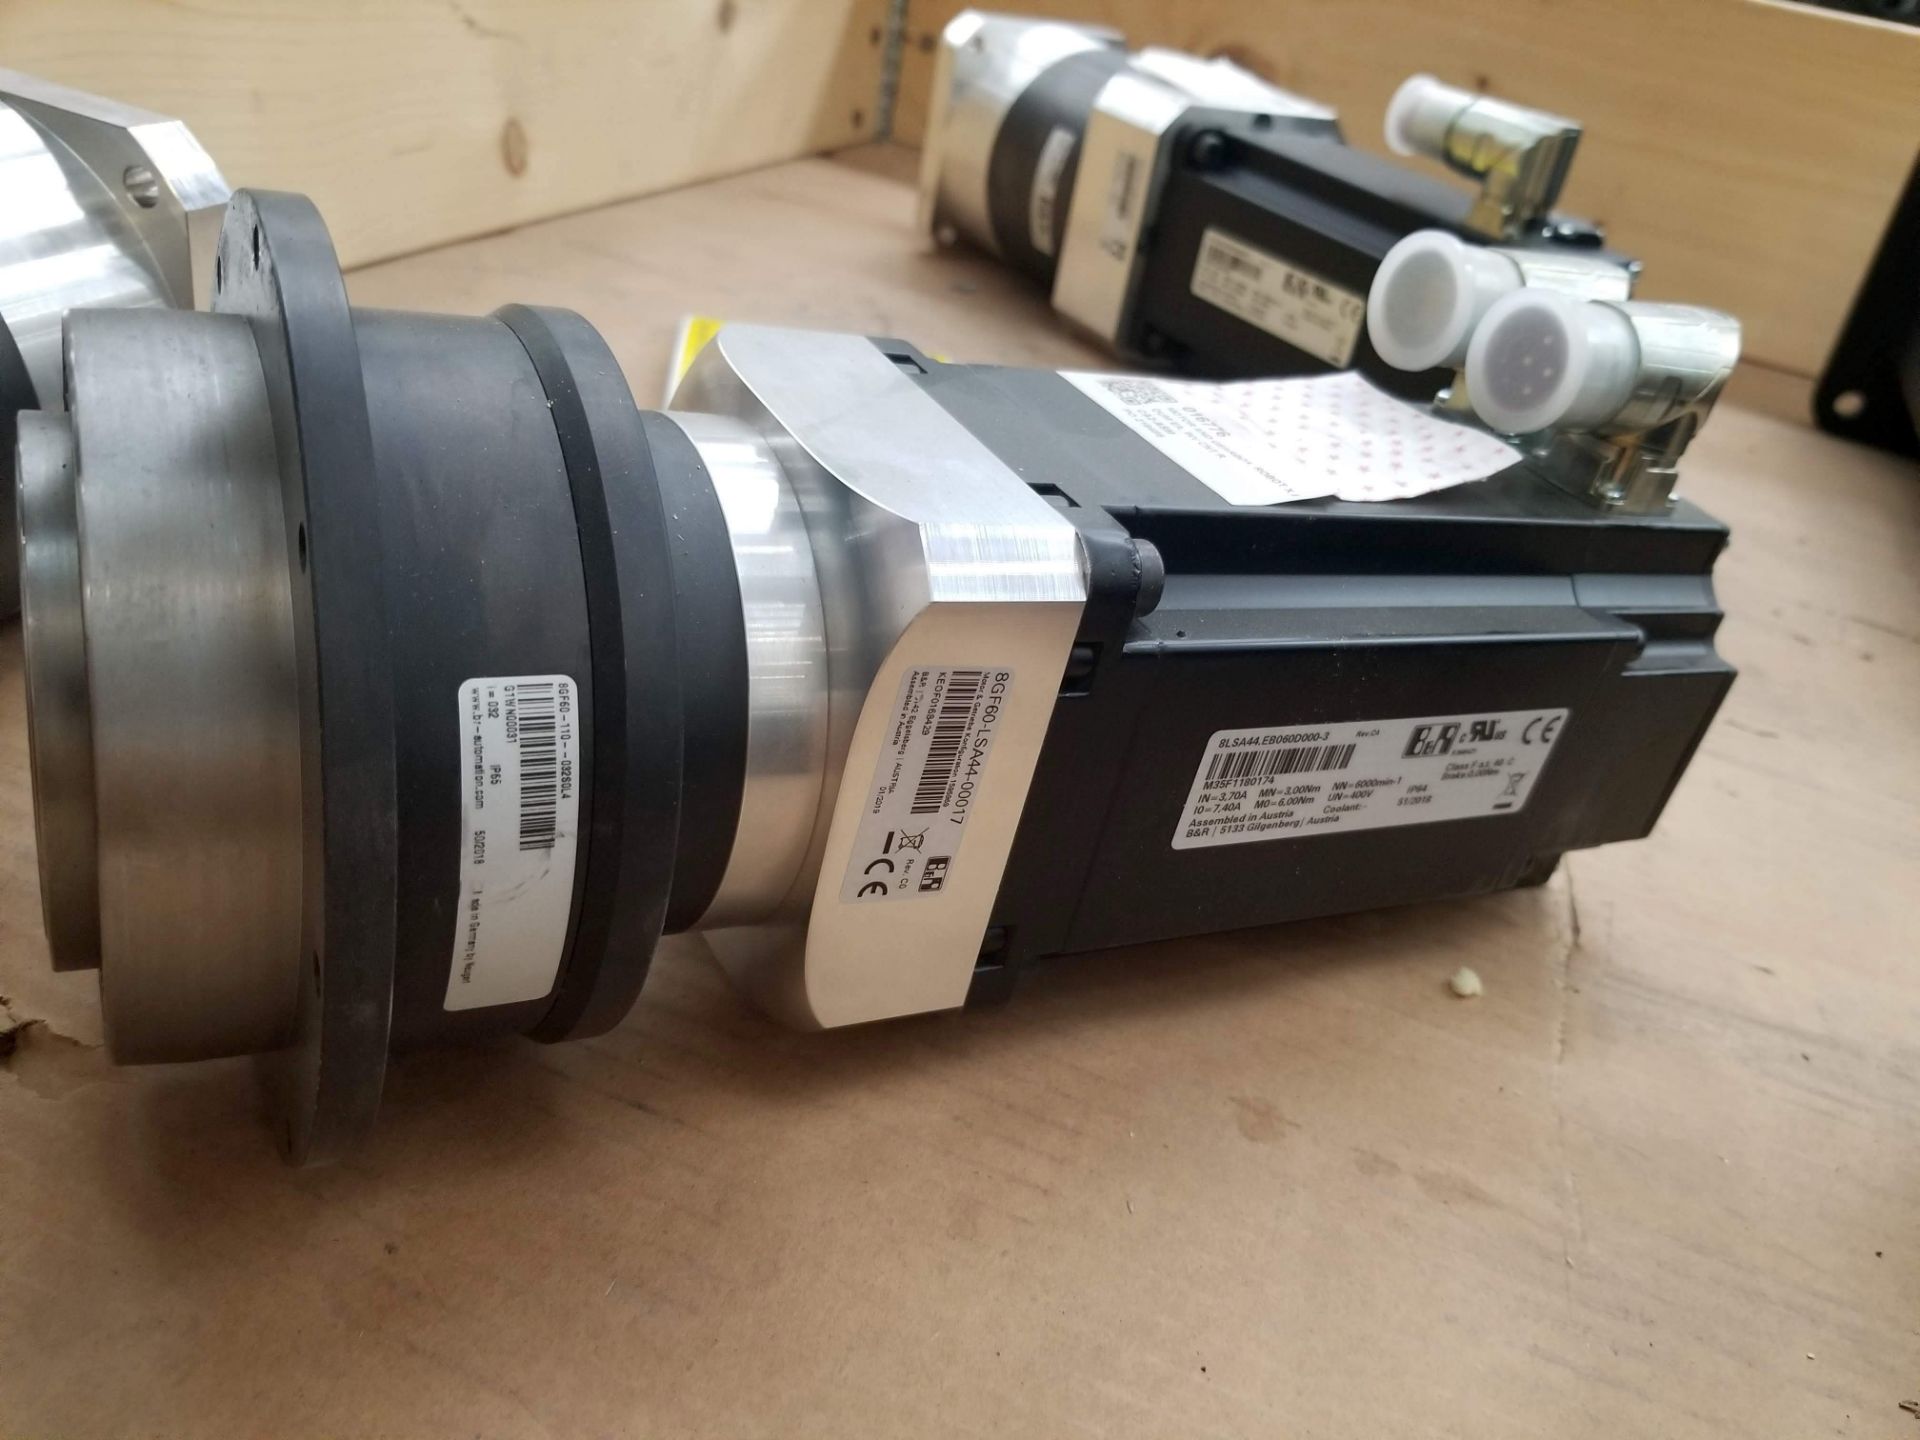 LOT - (6) B&R MOTOR & GEARBOX, SHUTTER N350. MOTOR & GEARBOX ROBOT. SERVOMOTOR AND GEARBOX. - Image 9 of 21